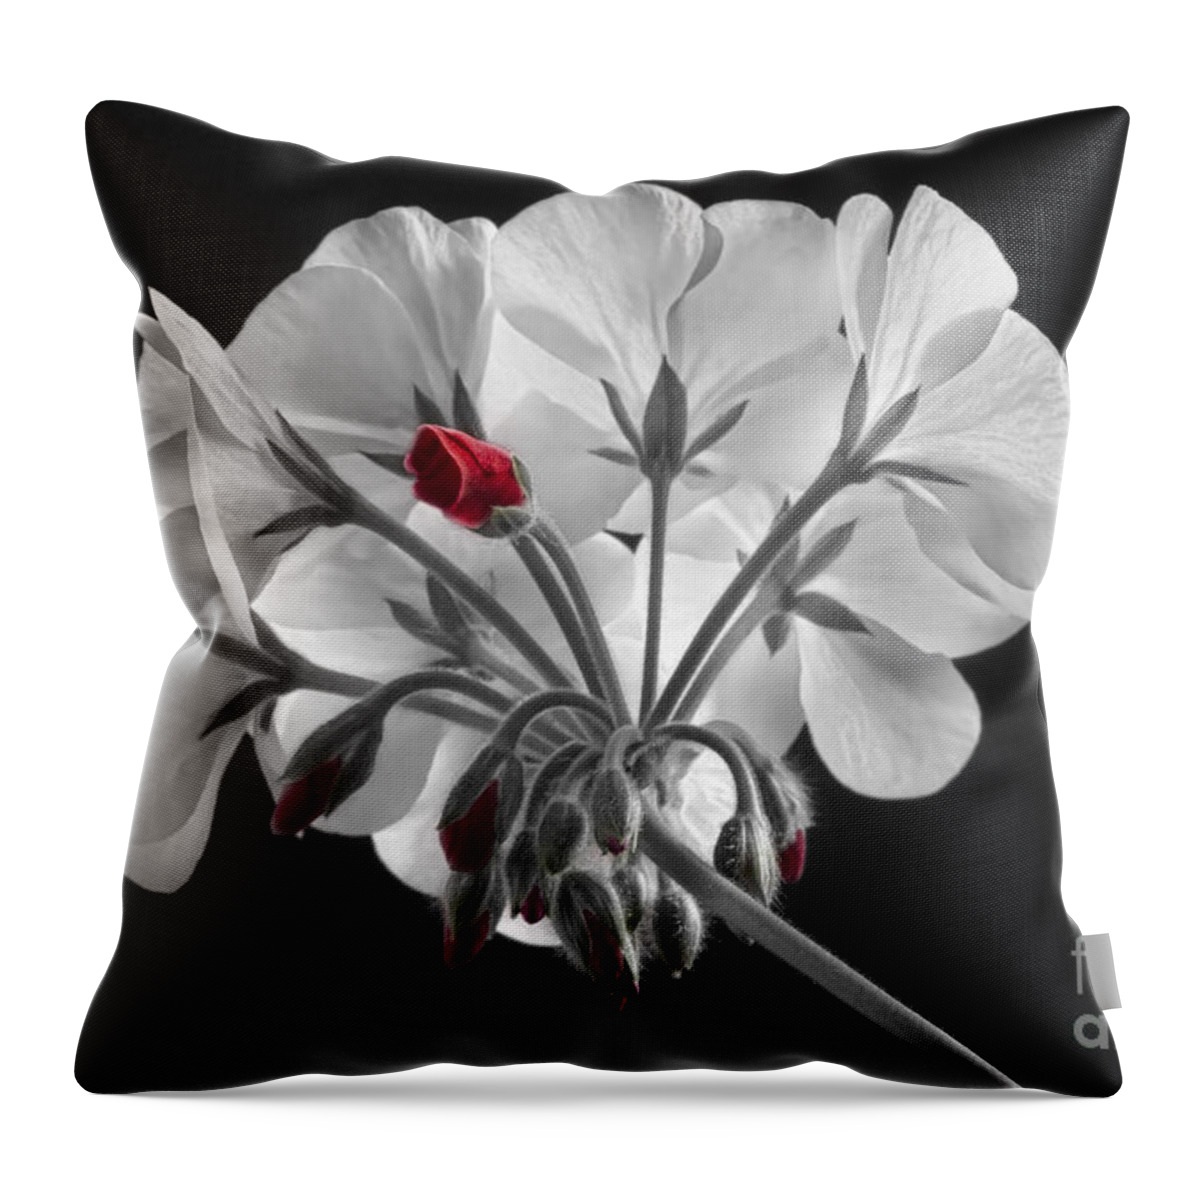 'red Geranium' Throw Pillow featuring the photograph Geranium Flower In Progress by James BO Insogna